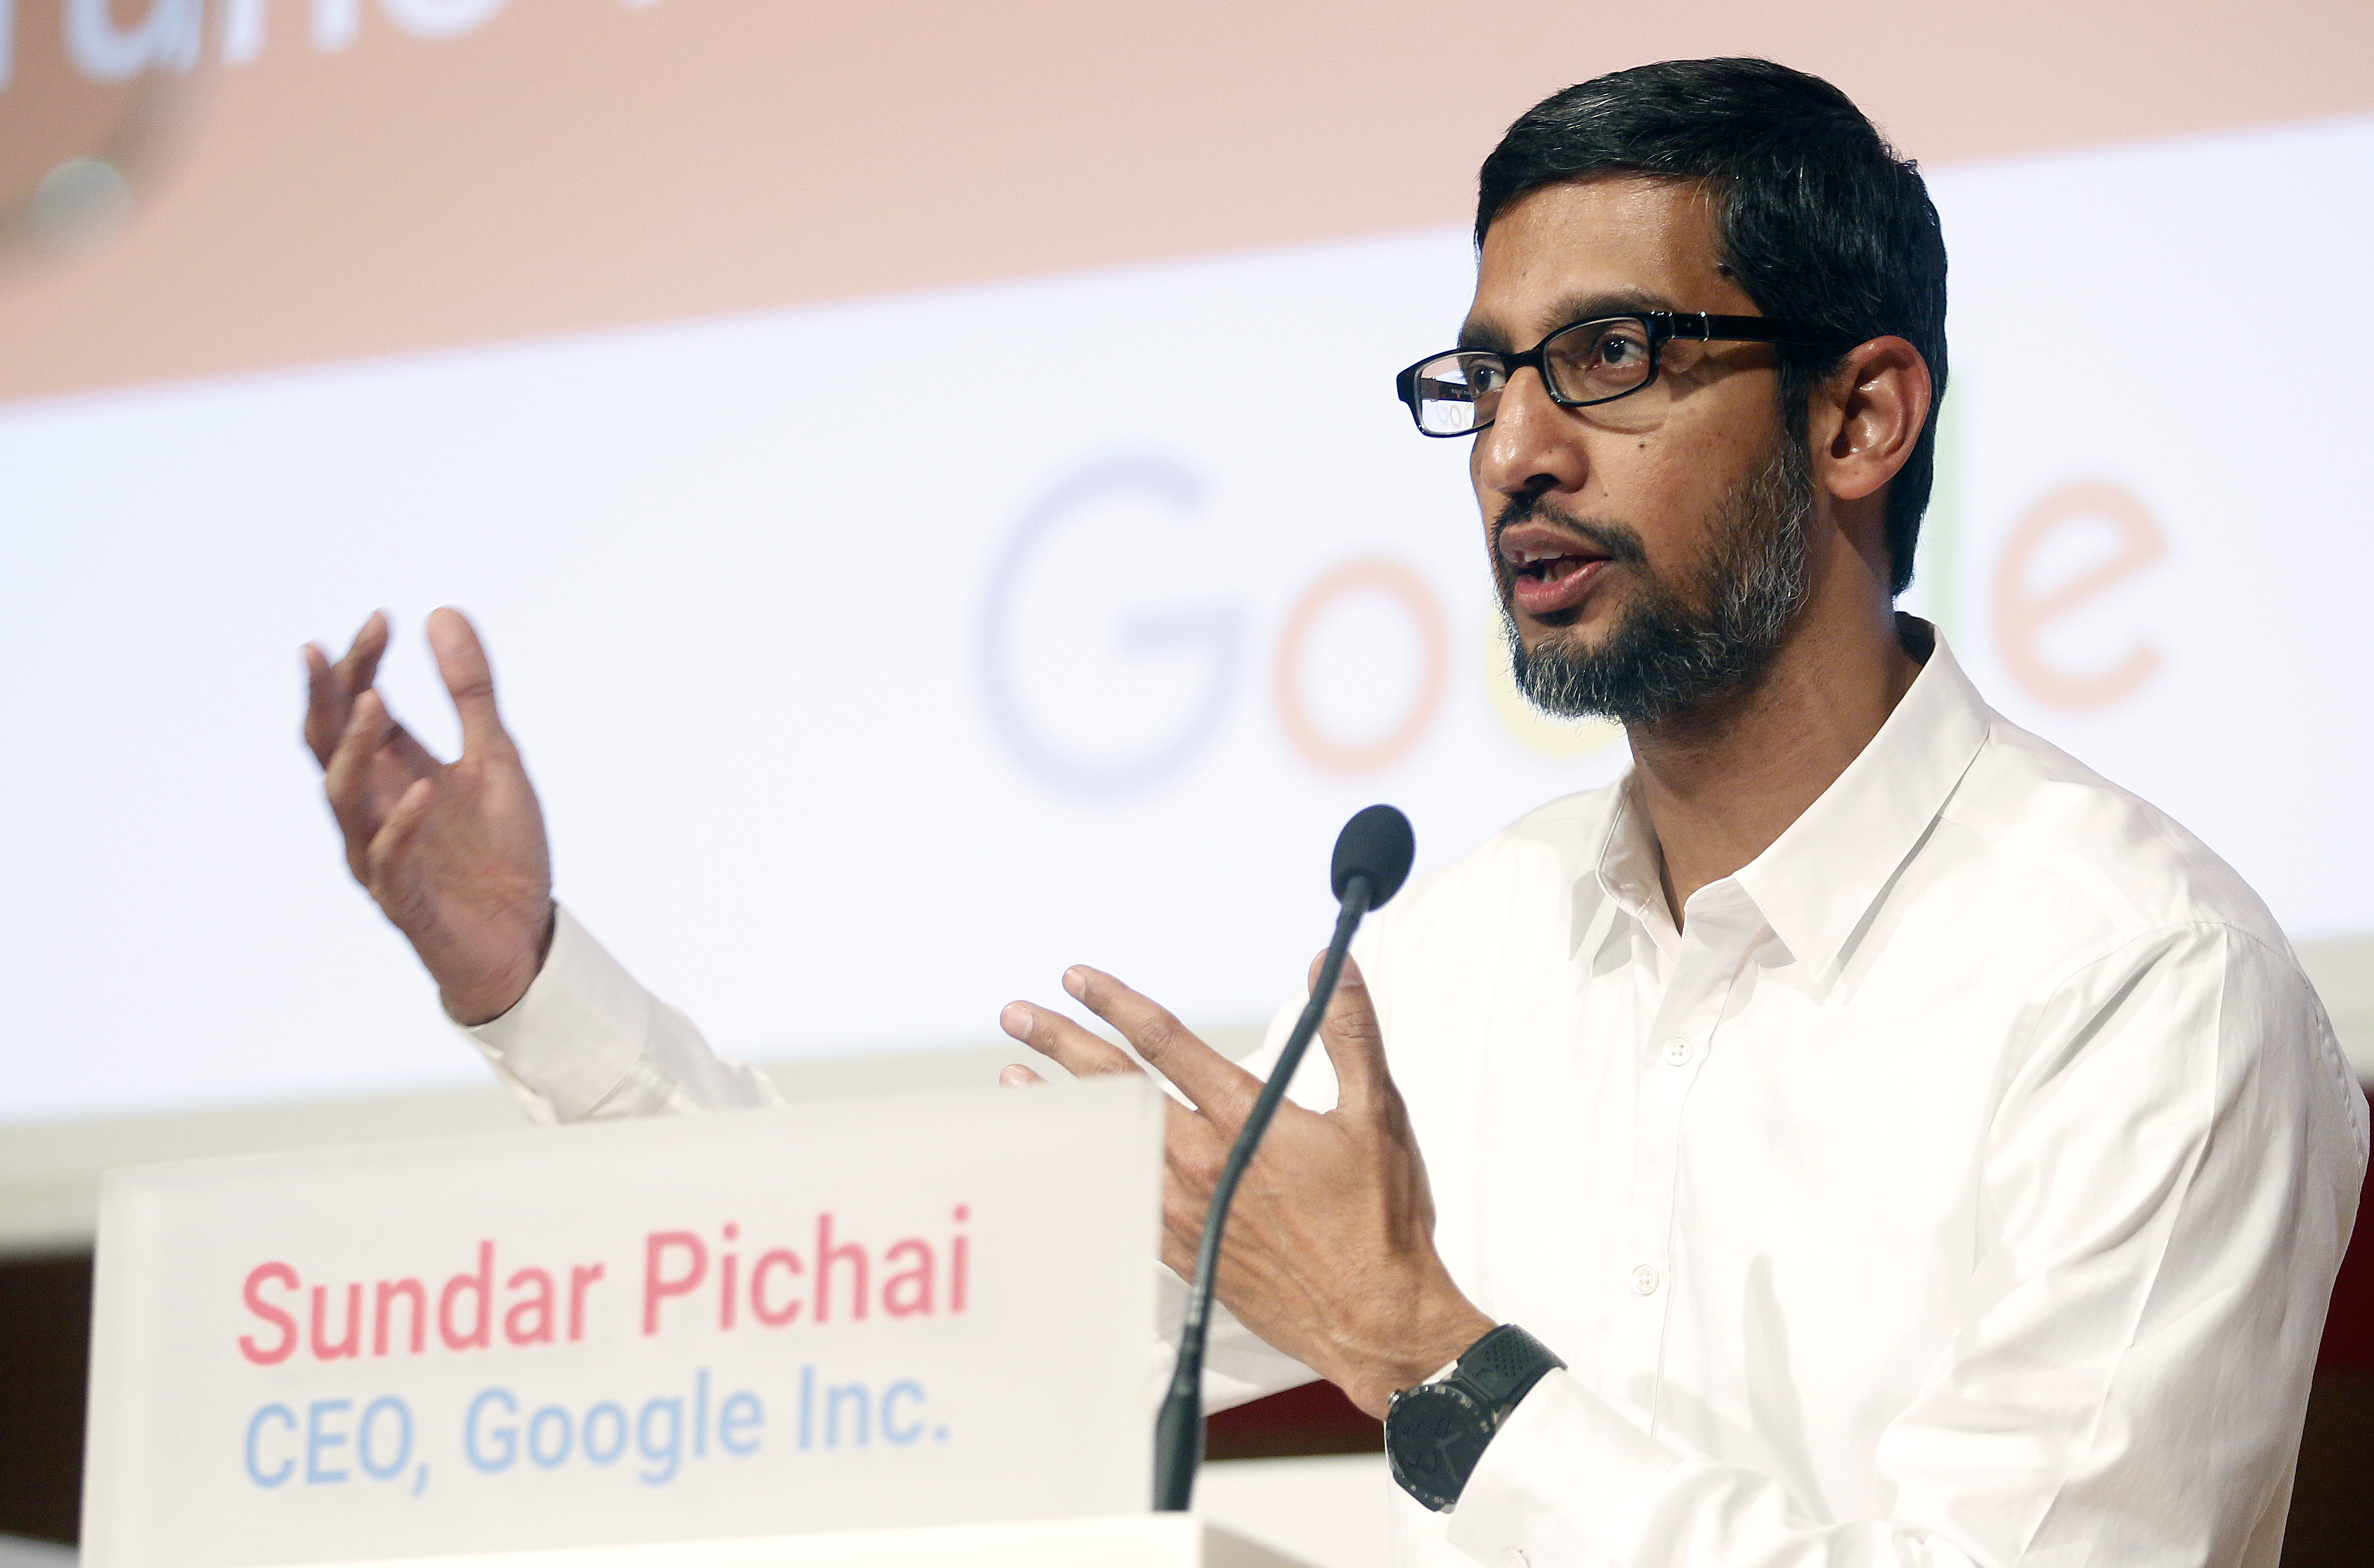 Google CEO, Sundar Pichai delivers a speech to the Sciences Po students on February 24, 2016 in Paris, France. (Chesnot&mdash;Getty Images)